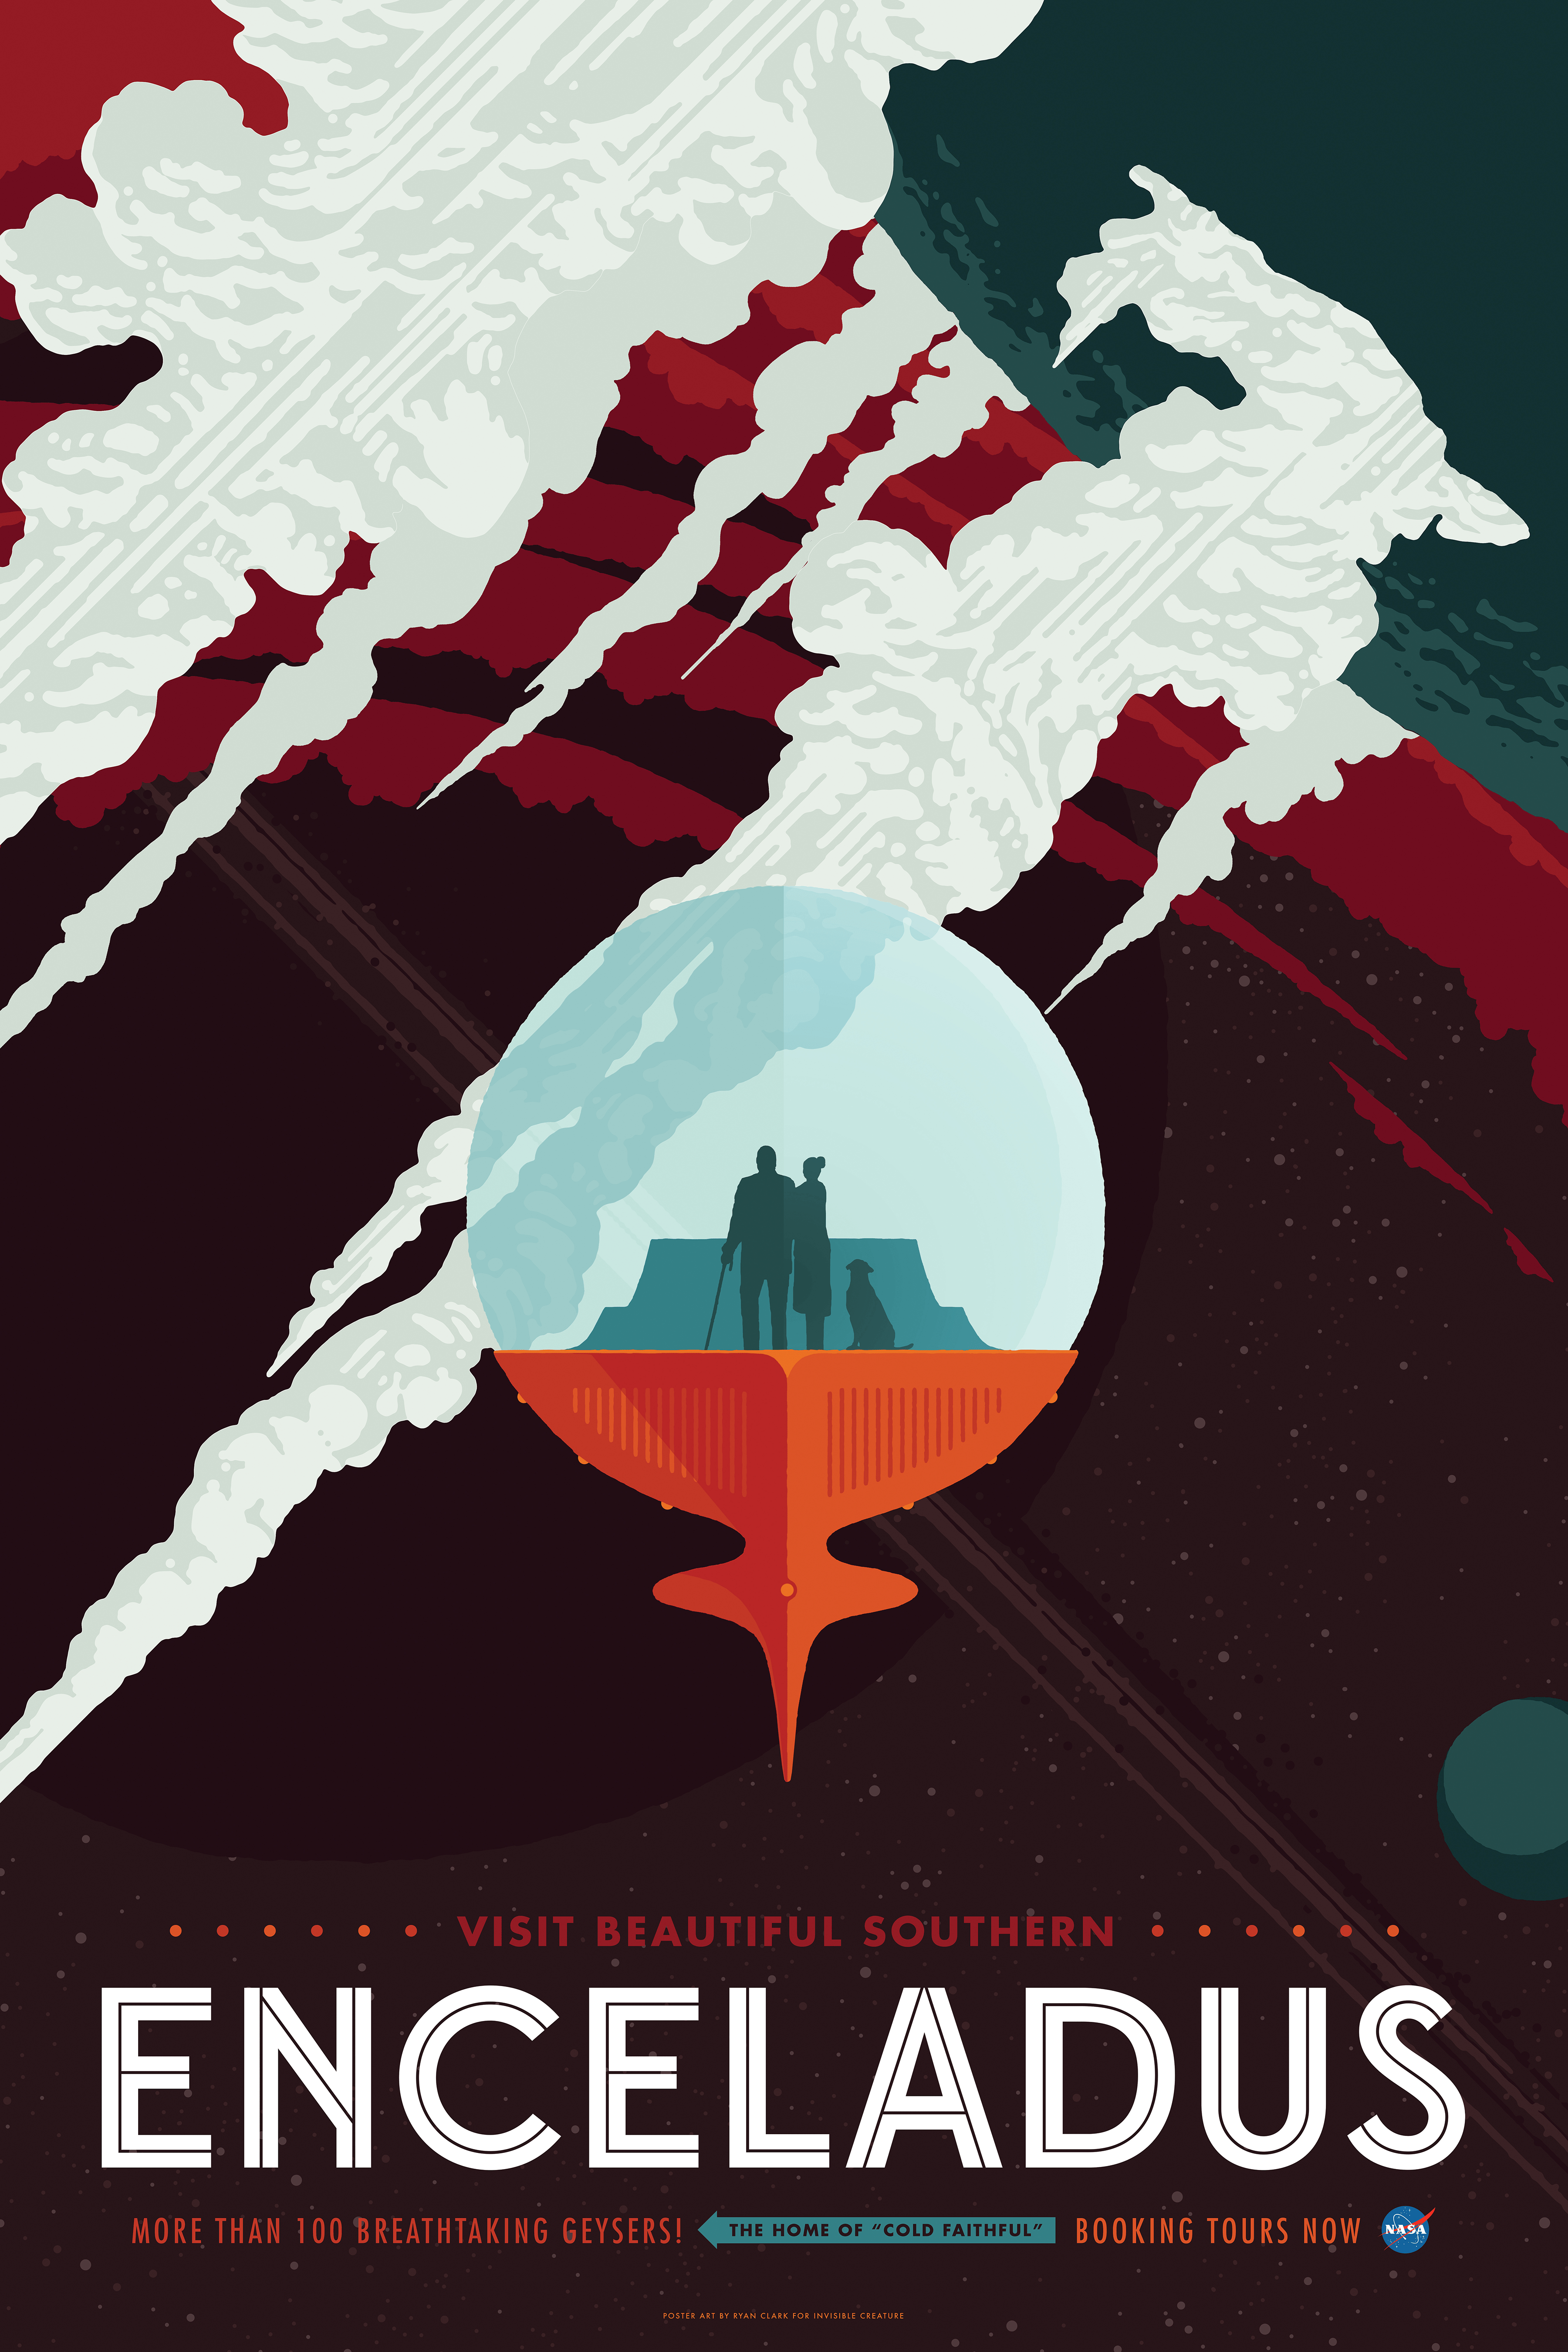 Unfilitered NASA Logo - NASA releases even more of its fantastical space tourism posters ...